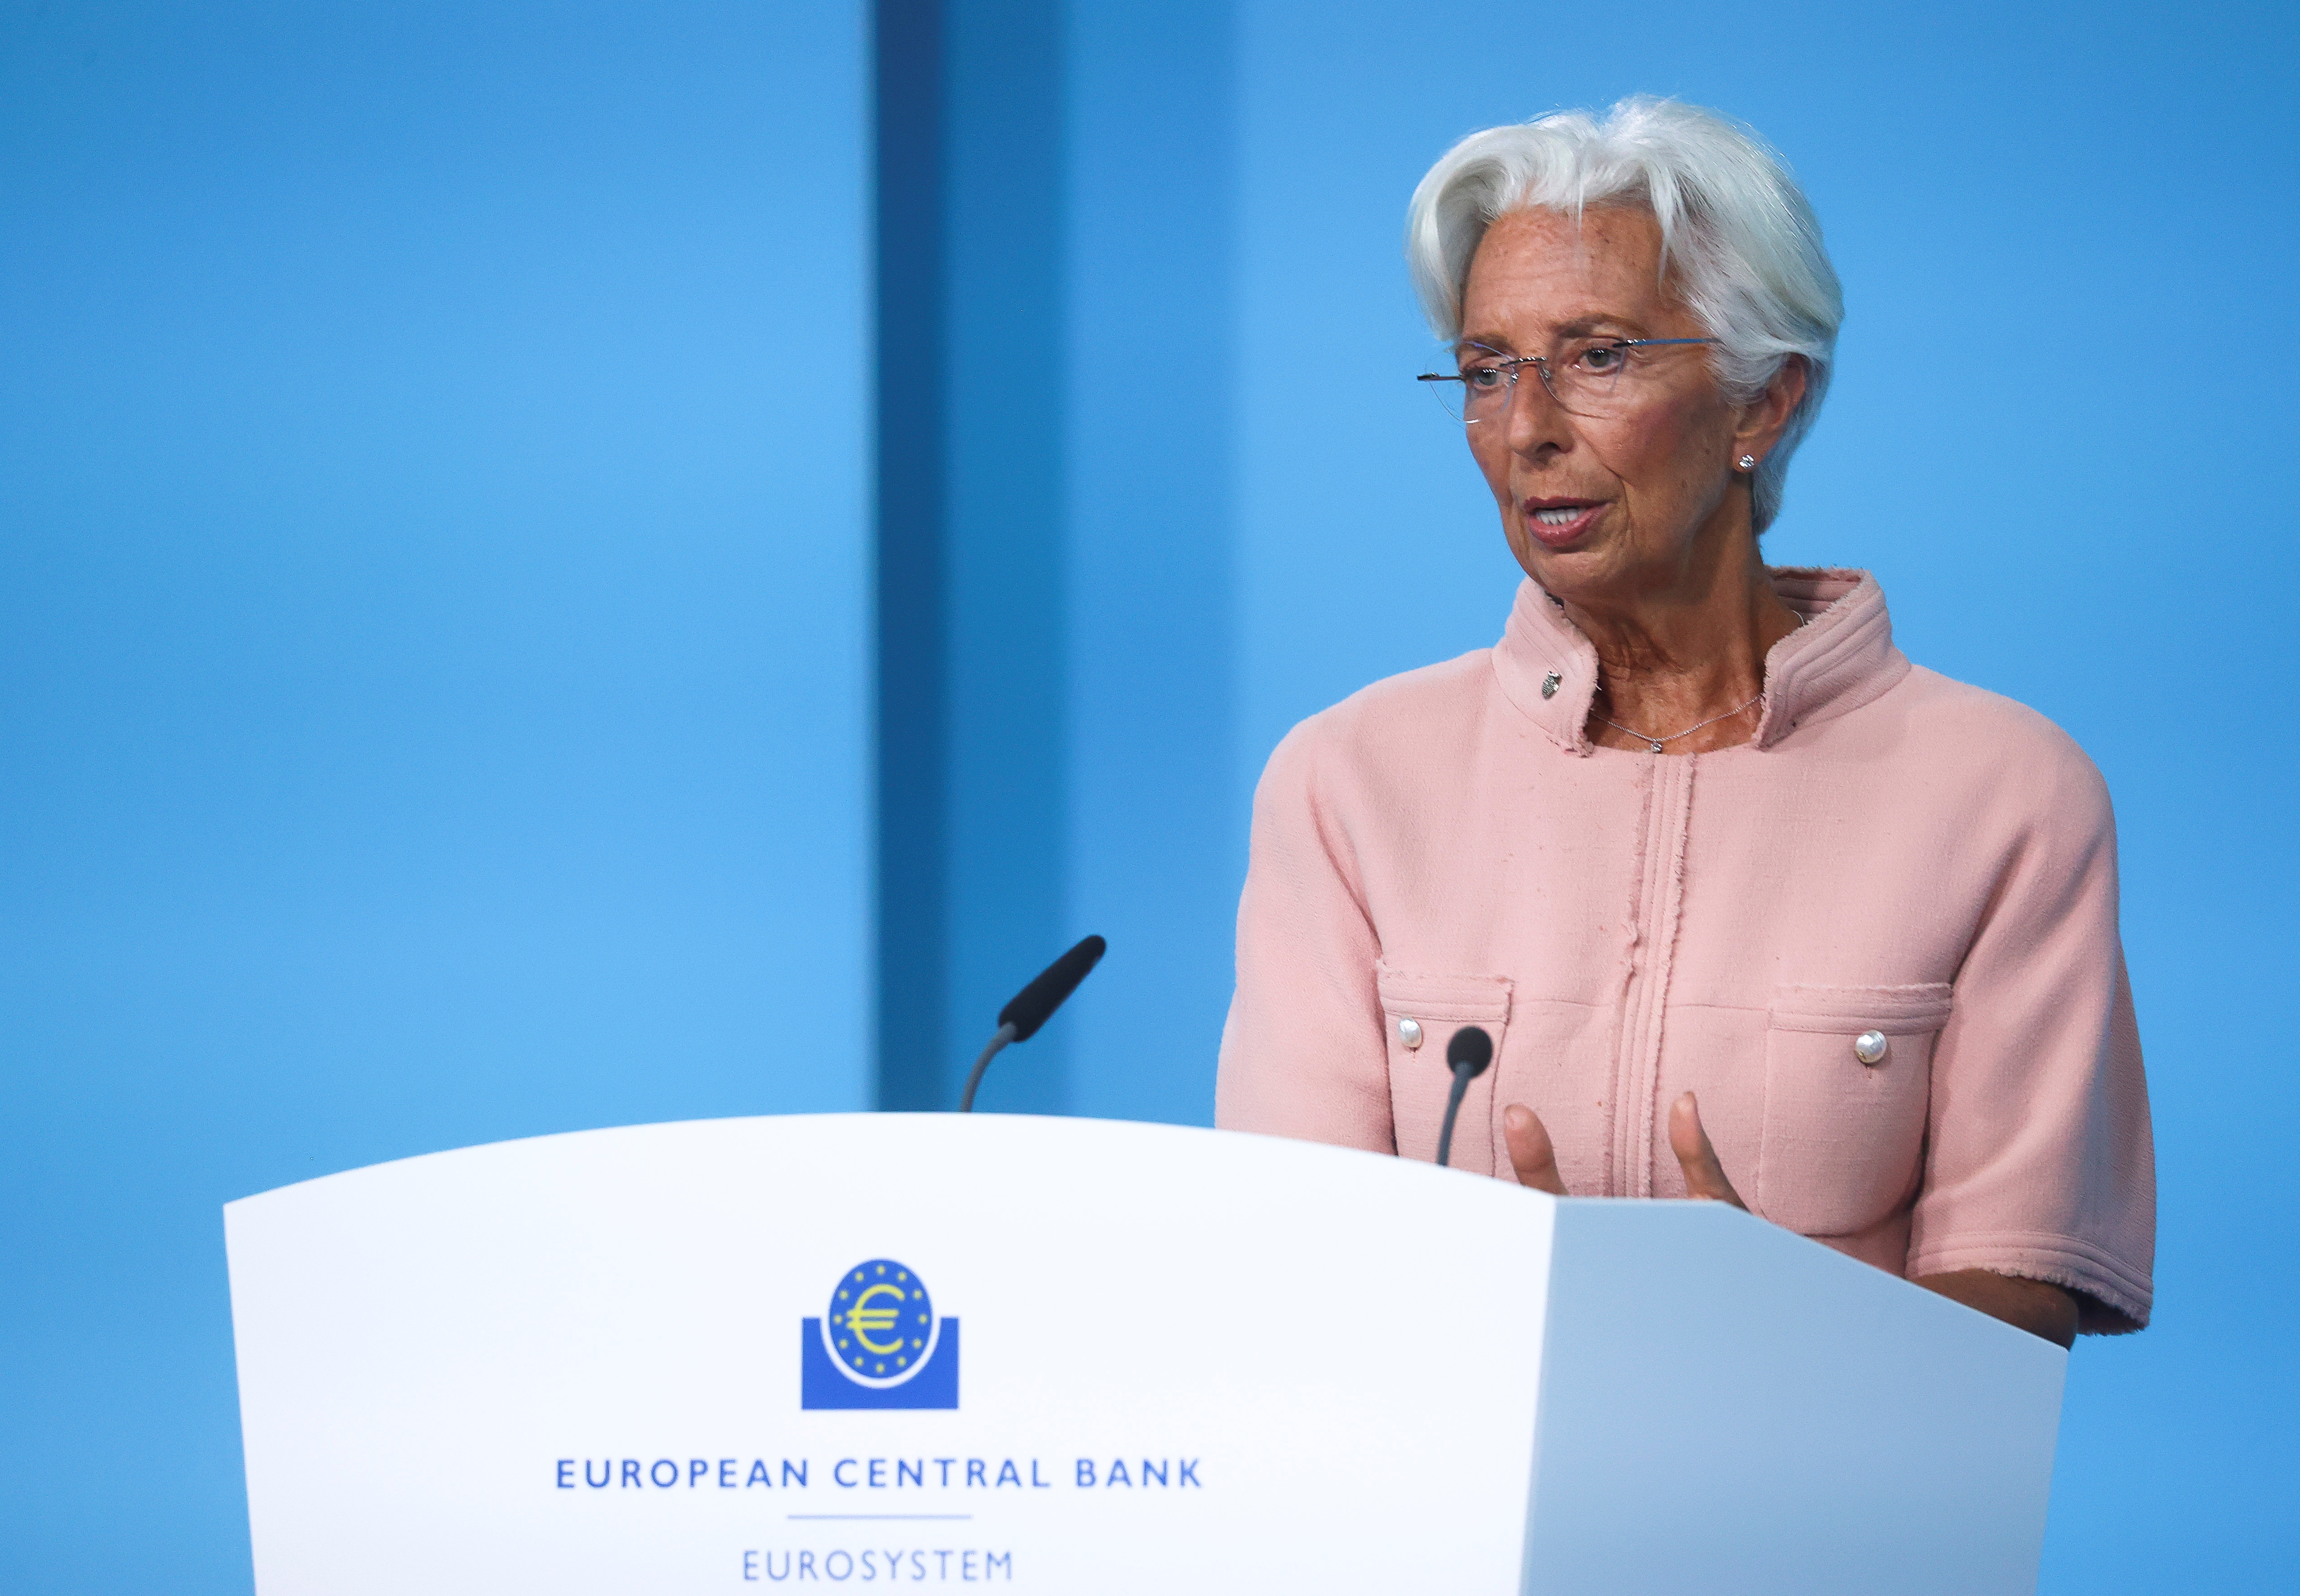 ECB President Lagarde takes part in a news conference in Frankfurt